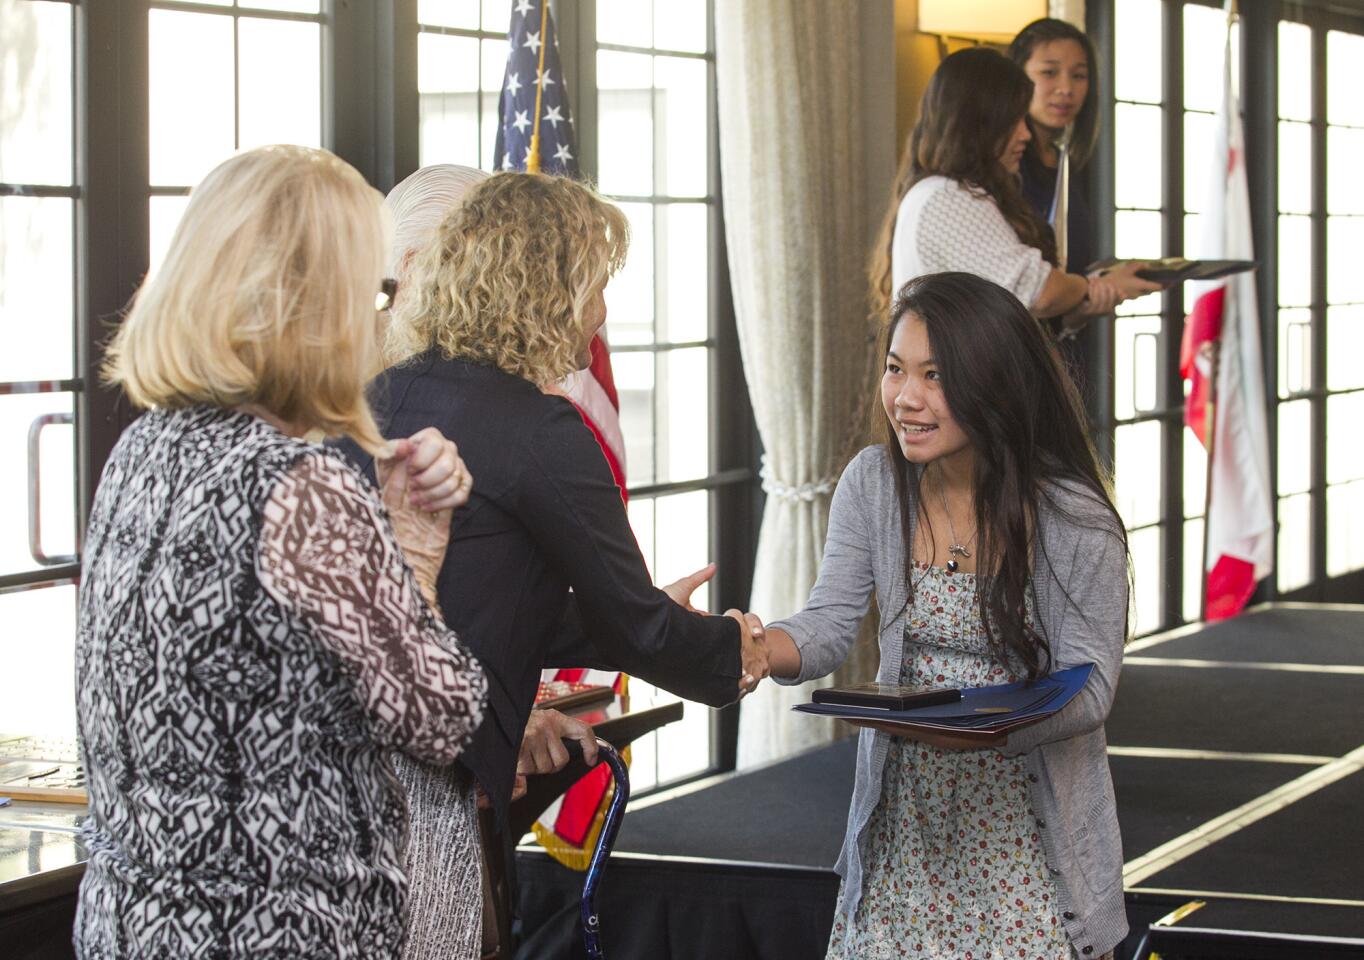 Costa Mesa High School's Hoan Nguyen shakes hands with Katrina Foley during the 35th annual Scholarship Recognition Breakfast, hosted by the Costa Mesa Chamber of Commerce on Friday, May 16. Nguyen received the Les Miller Outstanding Student Award. (Scott Smeltzer - Daily Pilot)